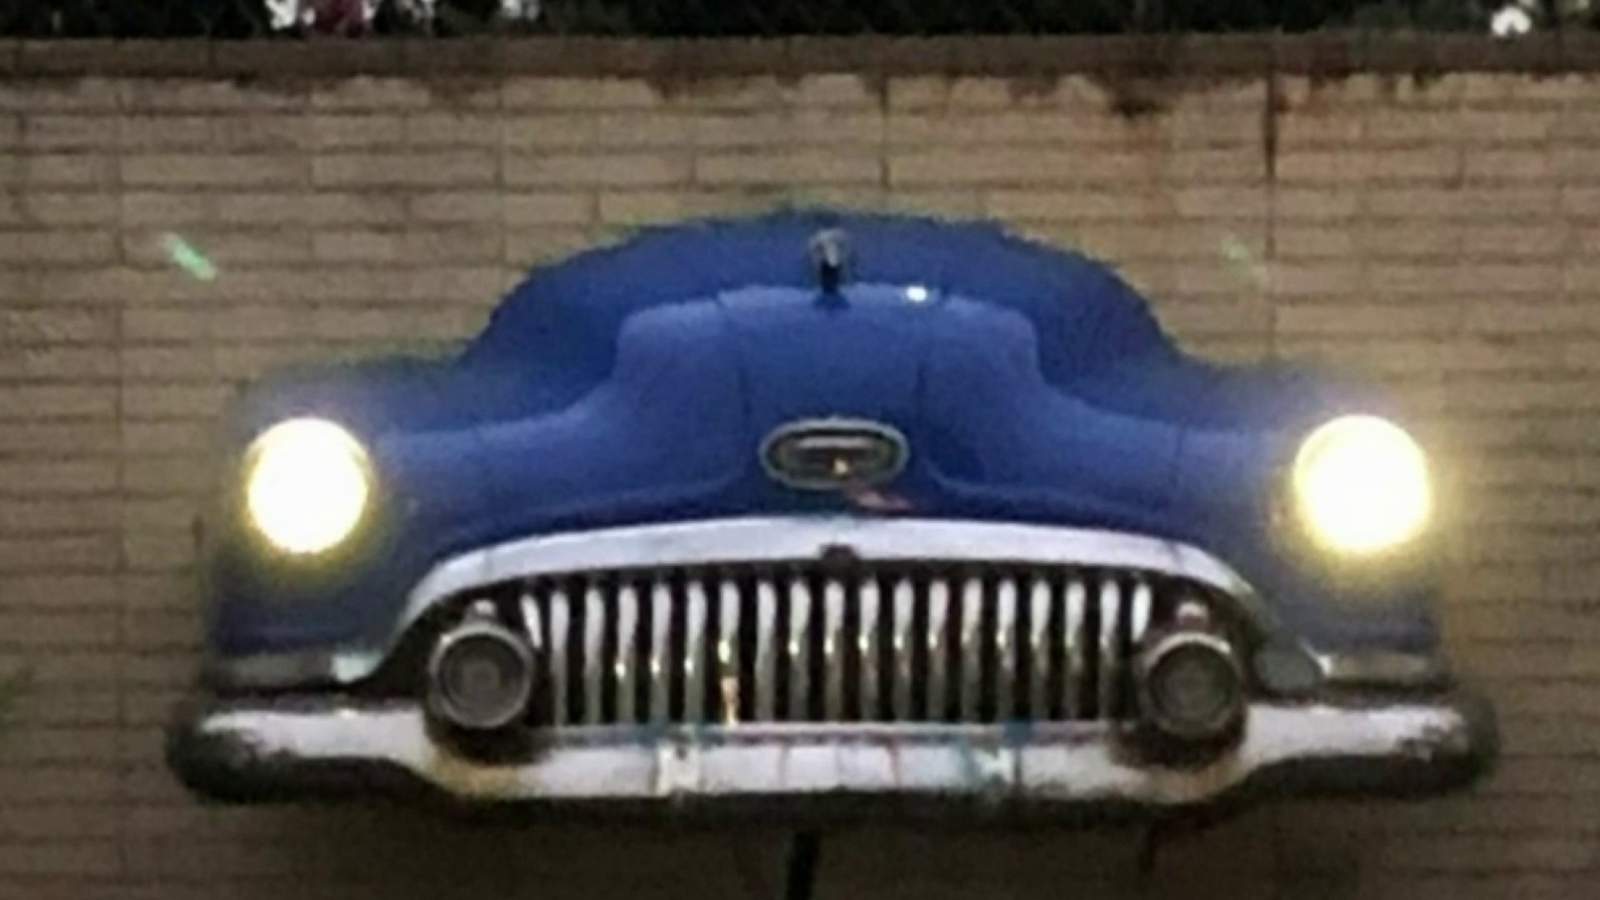 Have you seen this 1955 Buick Roadmaster mounted in Newport? Its been stolen